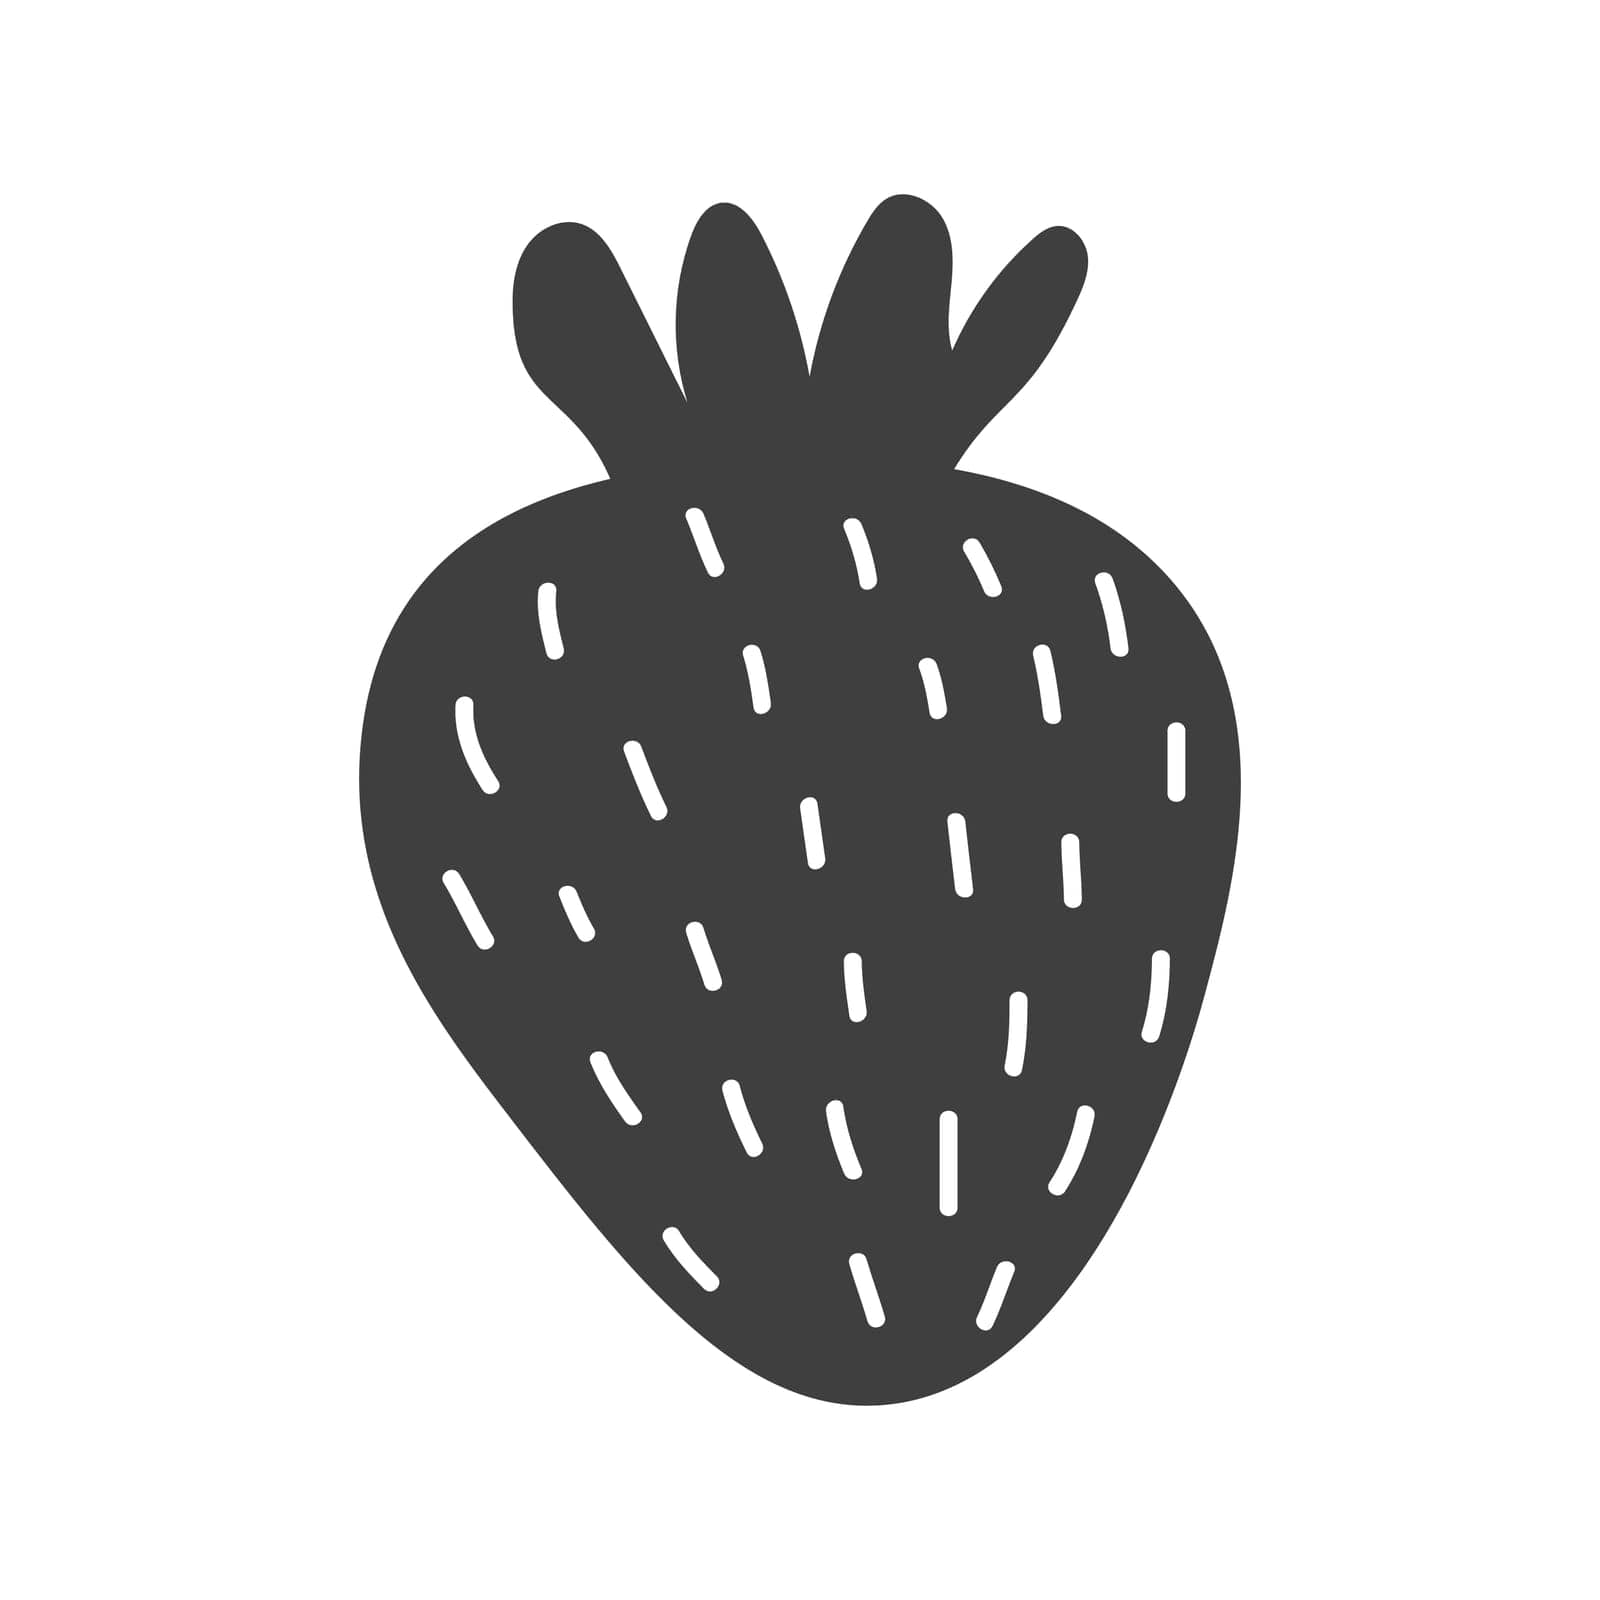 strawberries icon. food ingredient vector image. natural organic fruit and vegetarian food design element EPS by Alxyzt